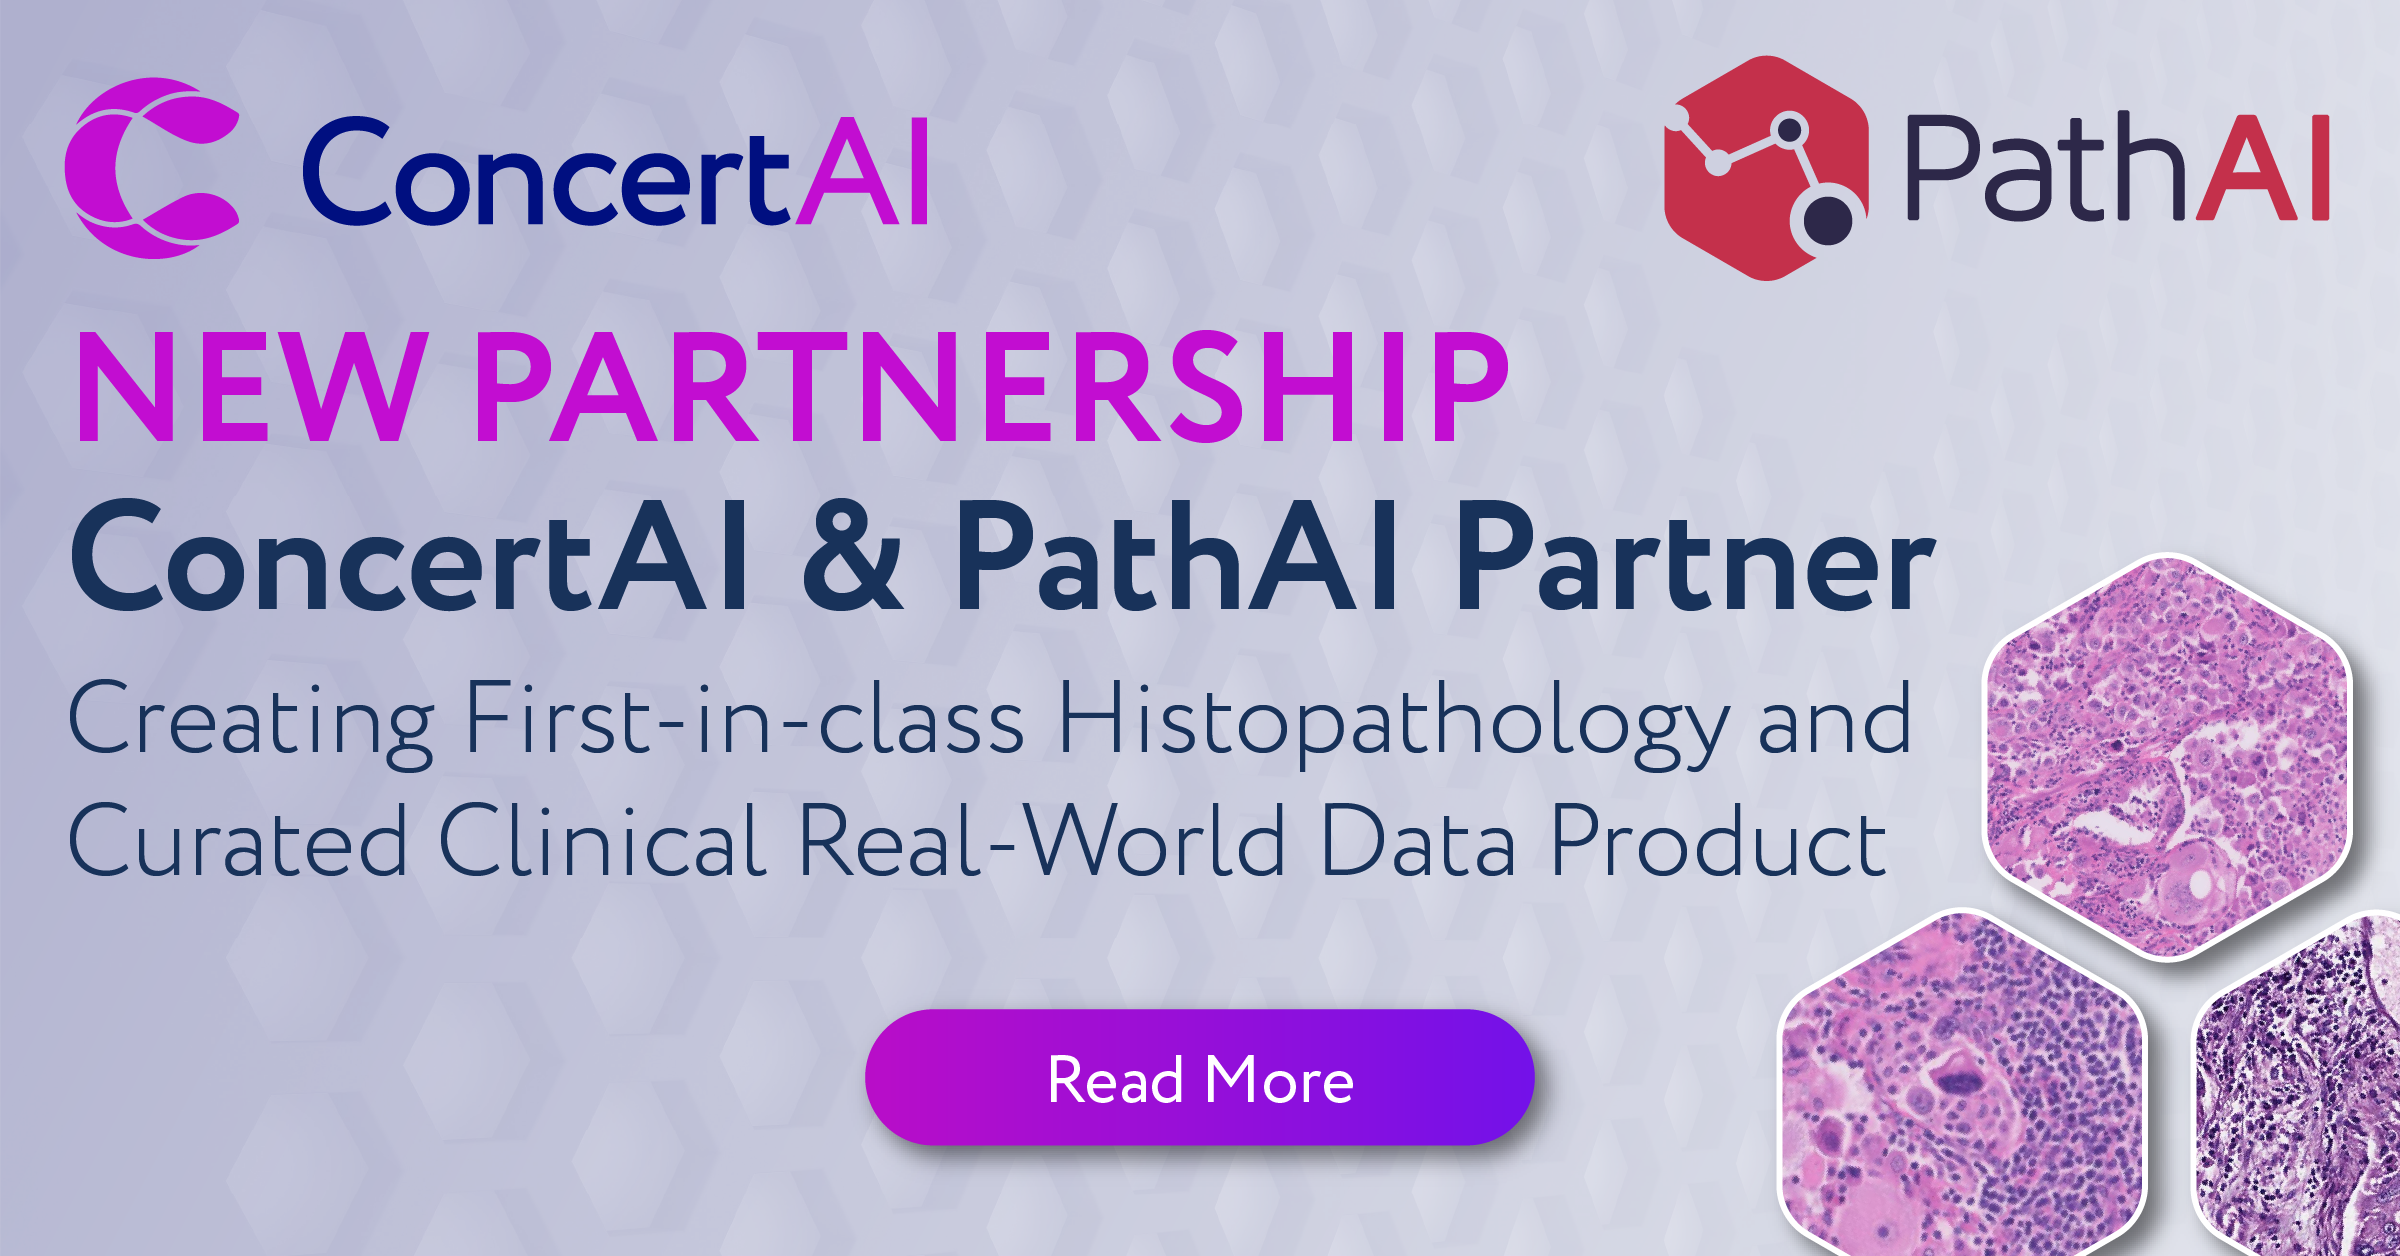 PathAI and ConcertAI Partner to Create First-in-class Histopathology and Curated Clinical Real-World Data Product